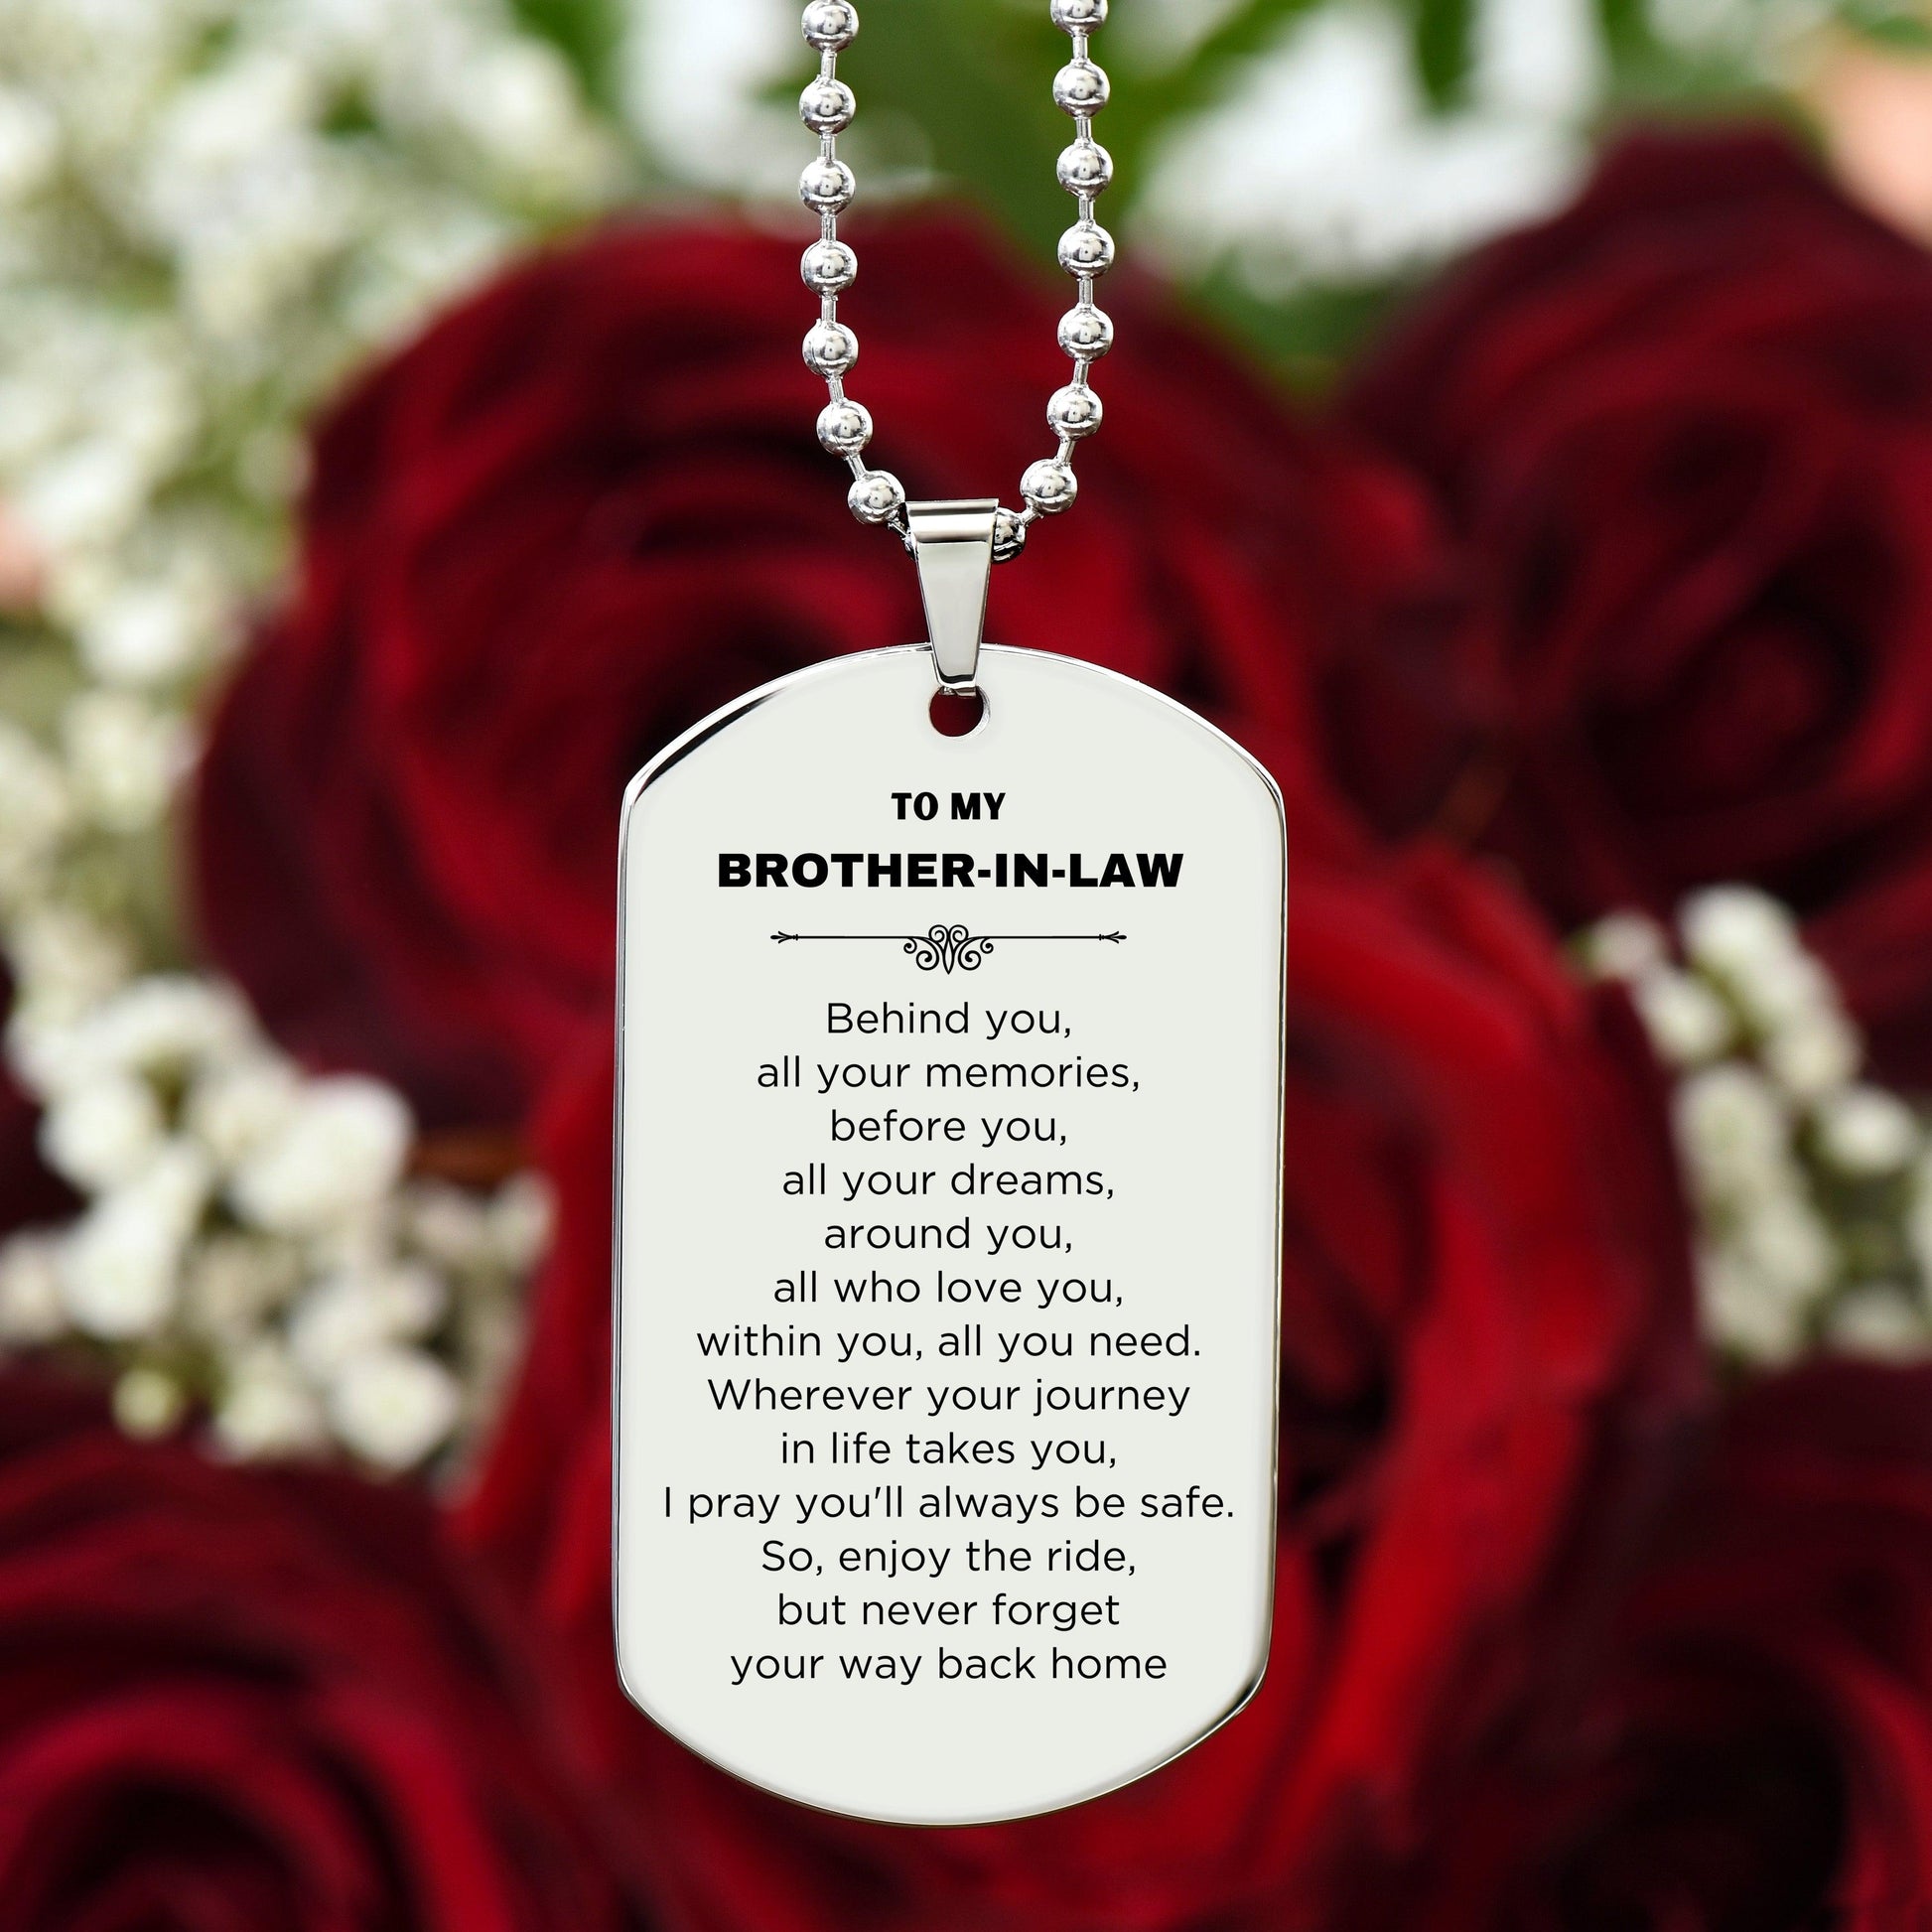 Inspirational Brother-In-Law Silver Dog Tag, Sentimental Birthday Christmas Unique Gifts For Brother In Law Behind you, all your memories, before you, all your dreams, around you, all who love you, within you, all you need - Mallard Moon Gift Shop